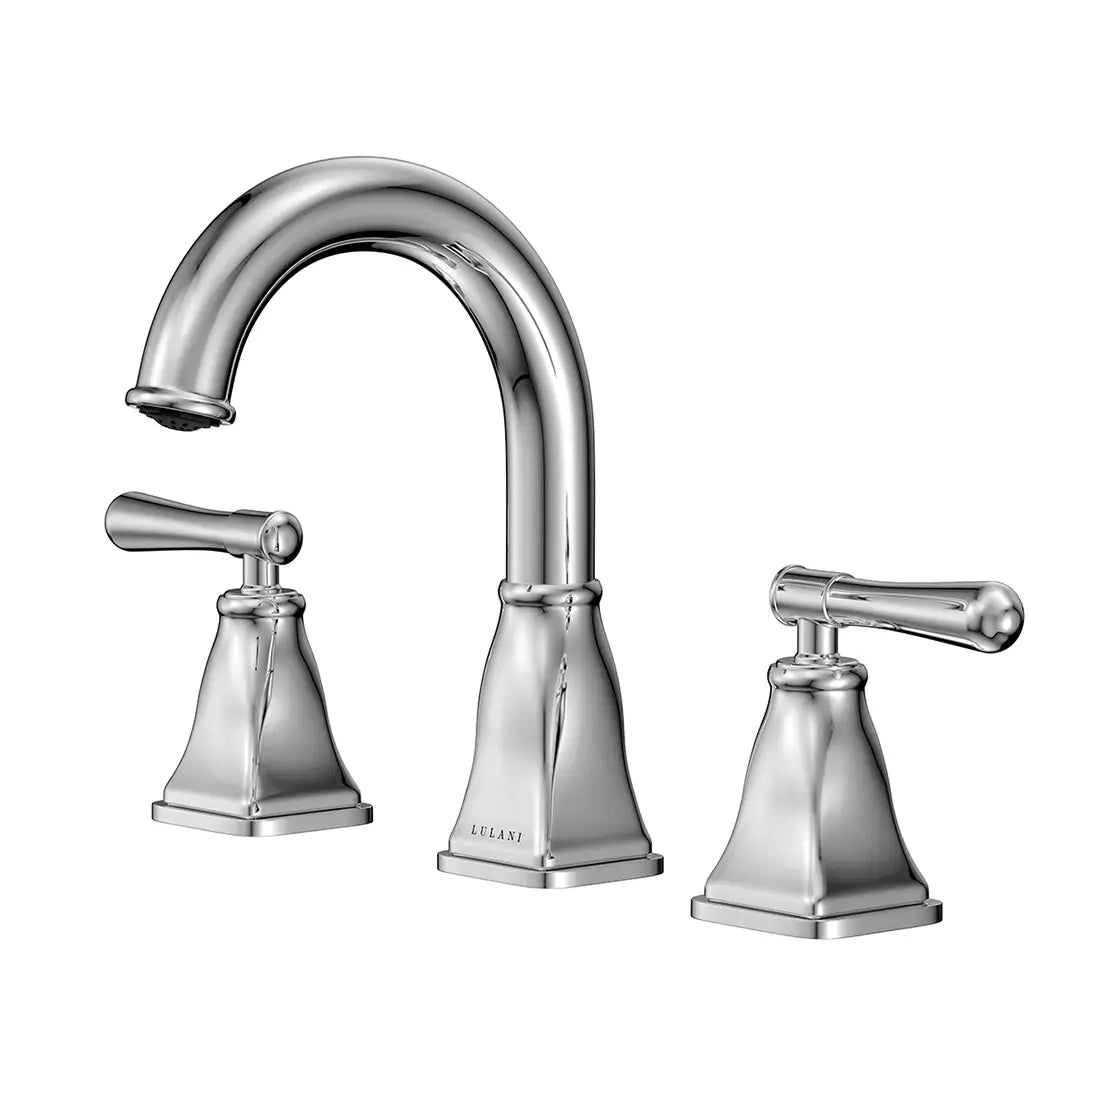 Aurora - Widespread Bathroom Faucet with drain assembly